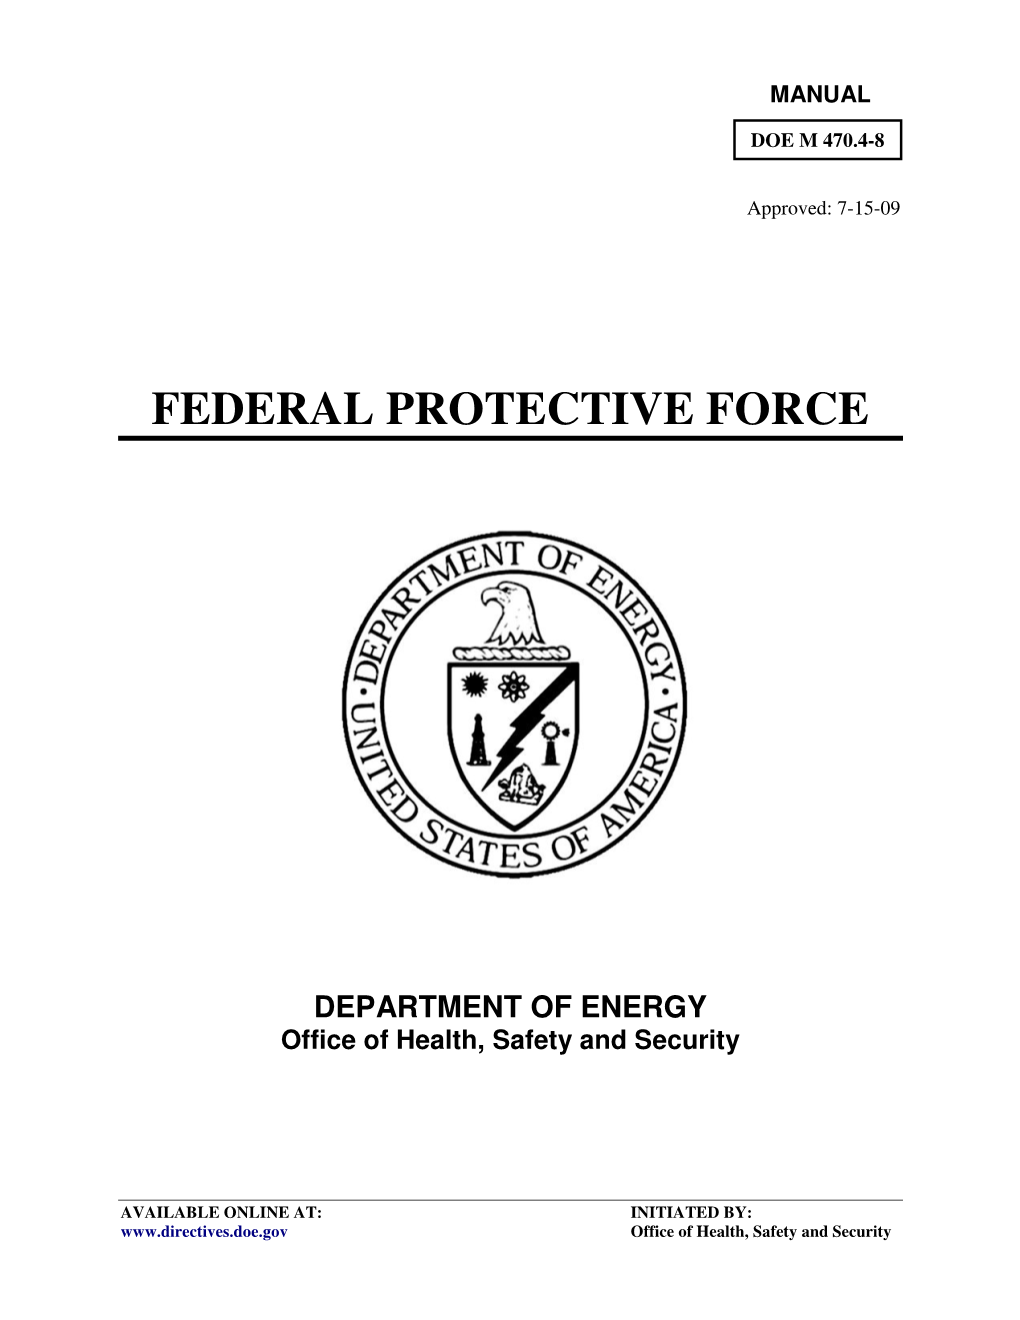 Federal Protective Force